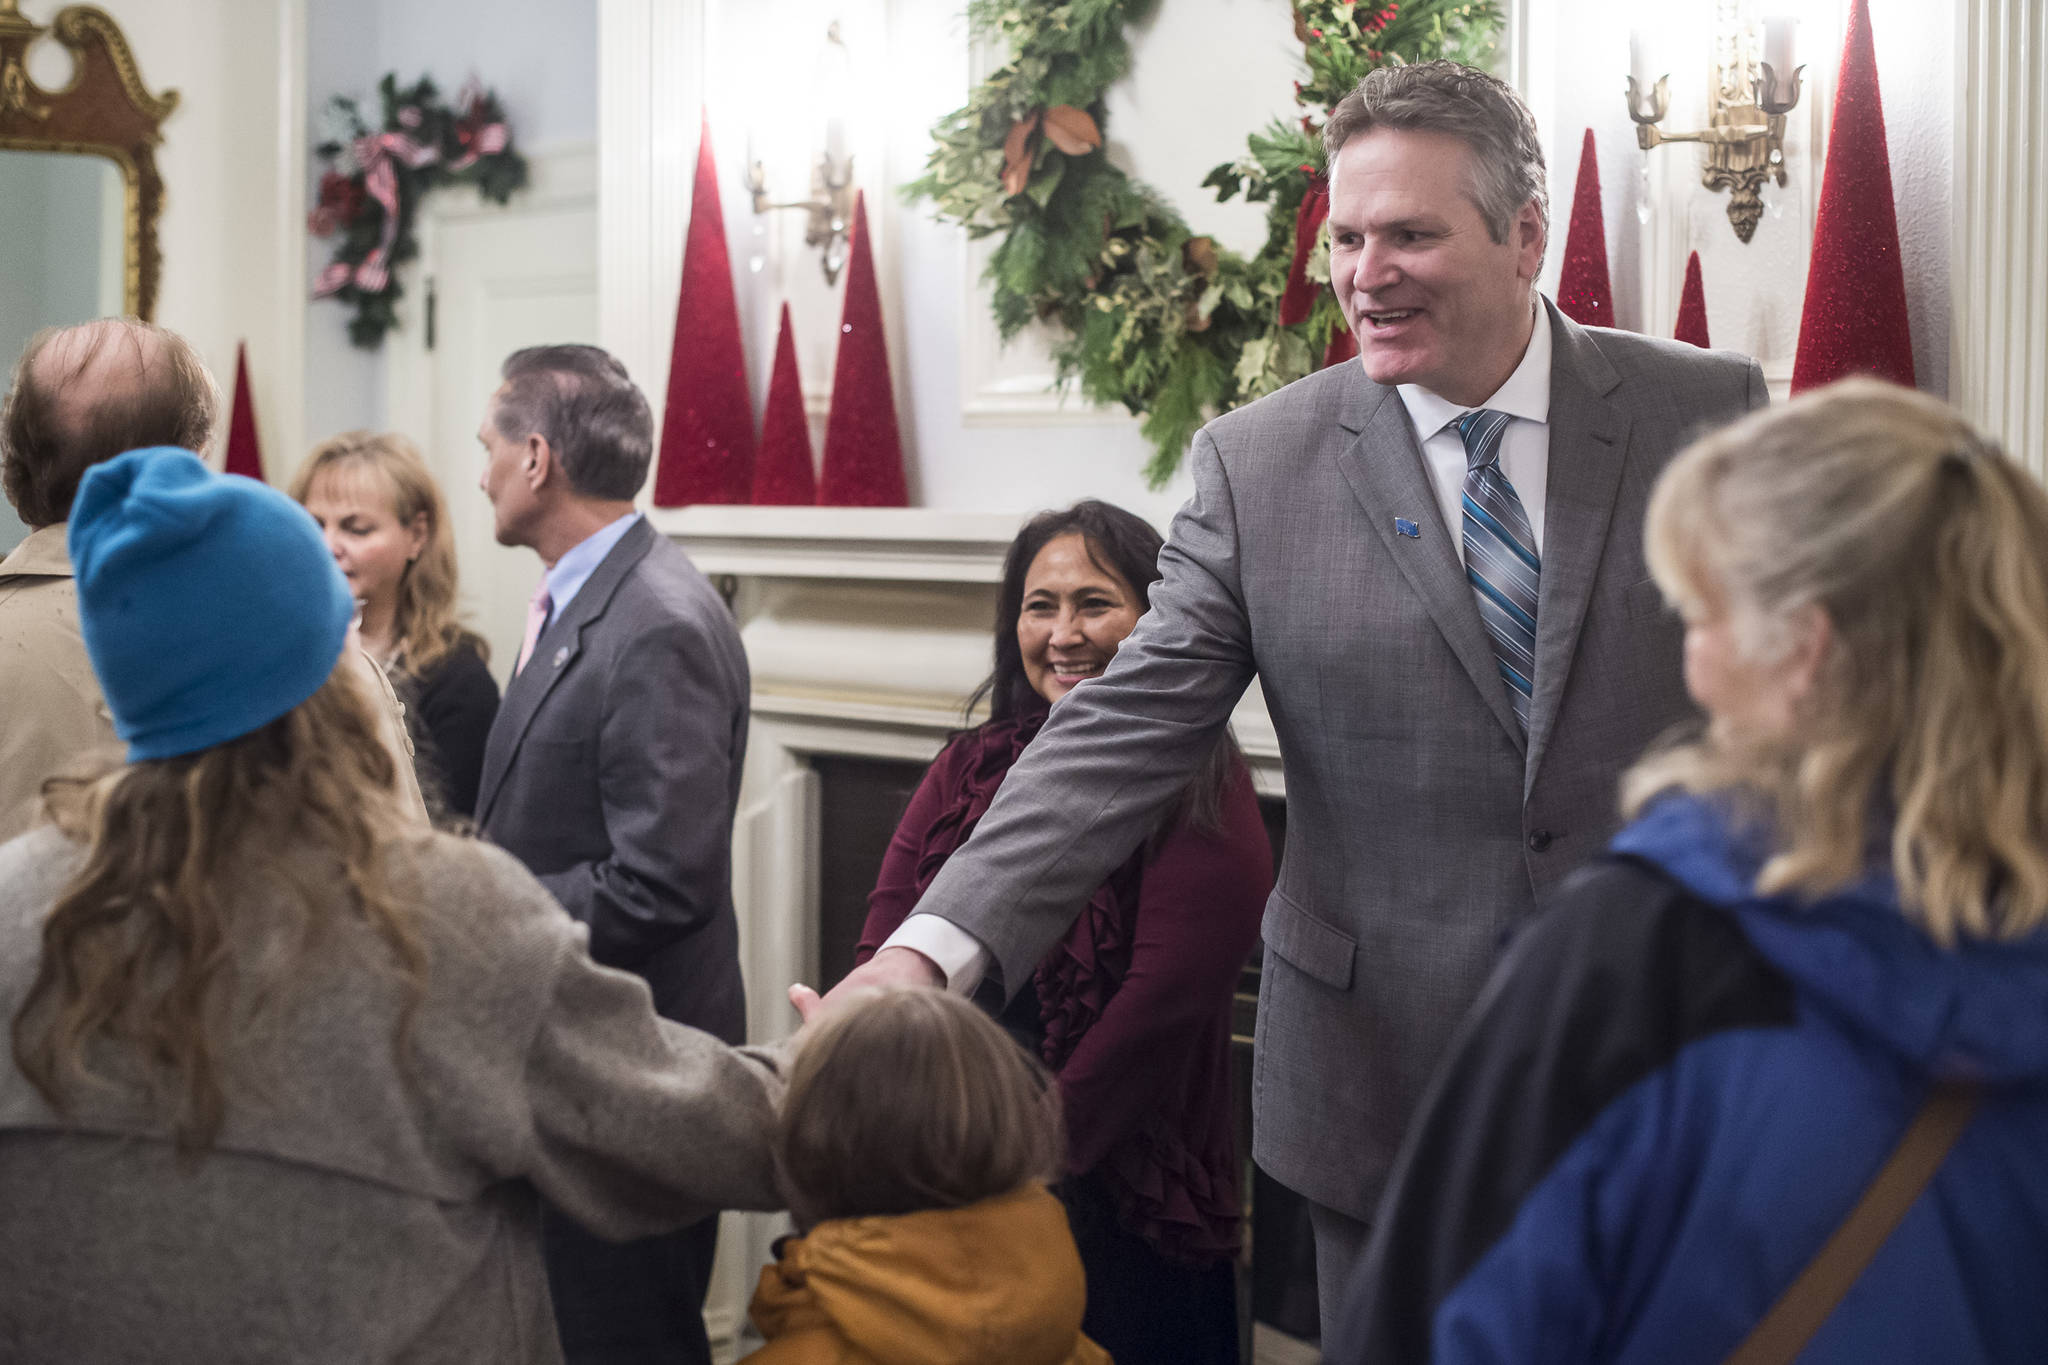 Gov. Mike Dunleavy and his wife, Rose, welcome Juneau residents at the Governor’s Open House on Tuesday, Dec. 11, 2018. (Michael Penn | Juneau Empire)